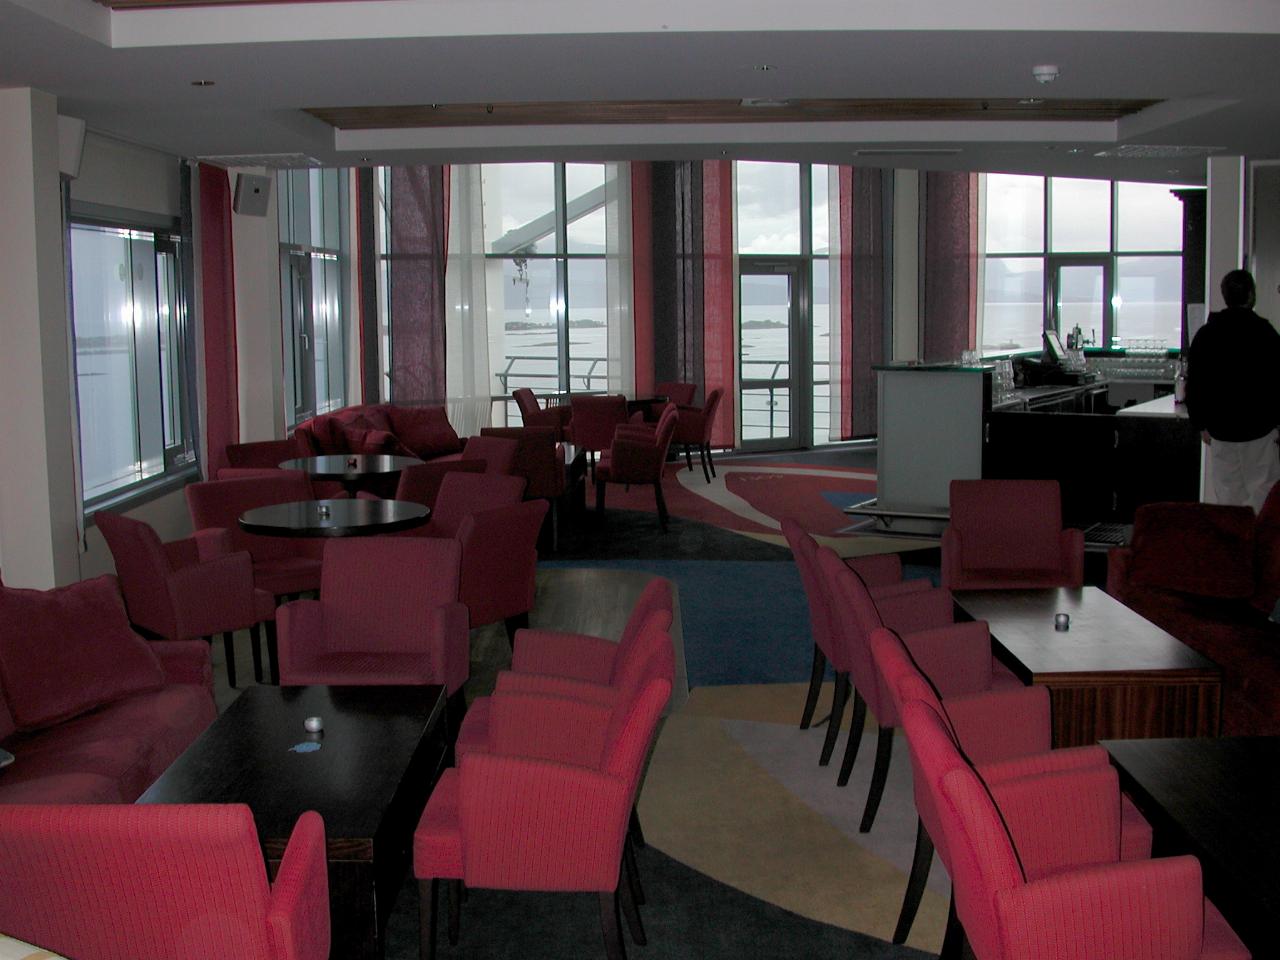 KPLU Viking Jazz: The top floor bar in the Rica Seilet (Sail) Hotel, looking over the fjord